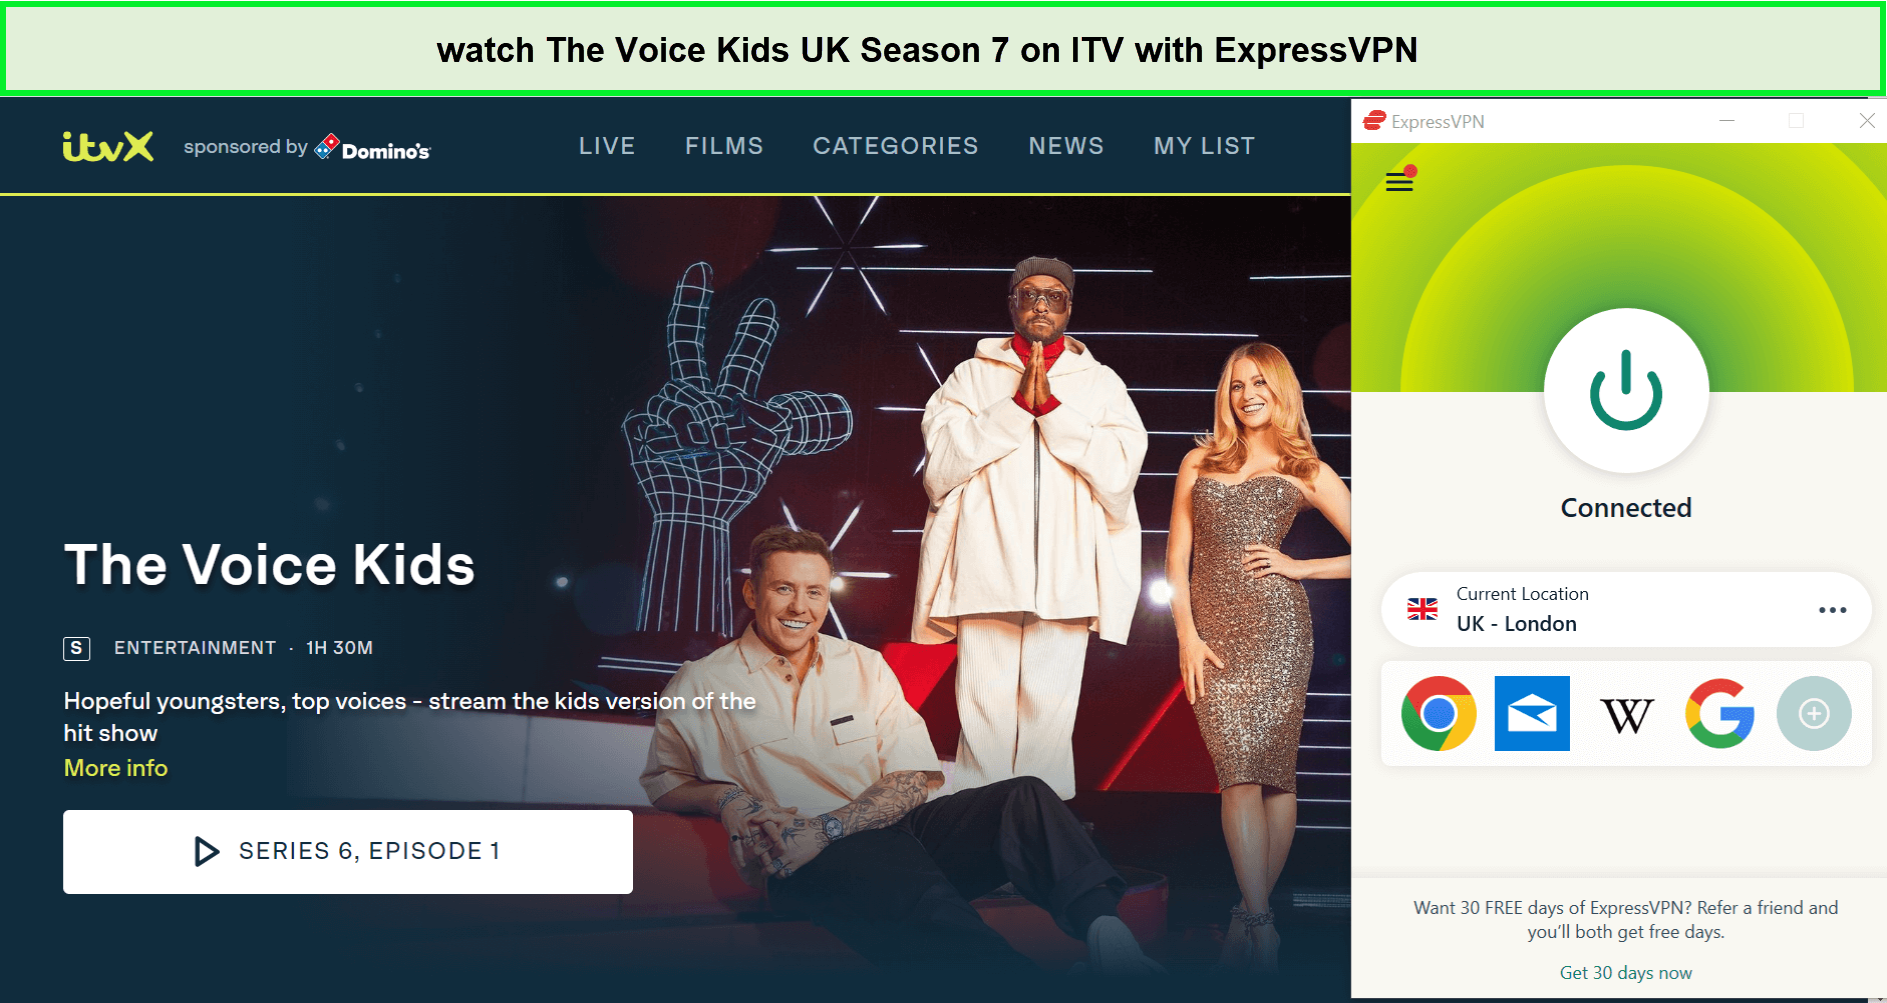 Watch-The-Voice-Kids-UK-Season-7-on-ITV-in-Hong Kong-with-ExpressVPN